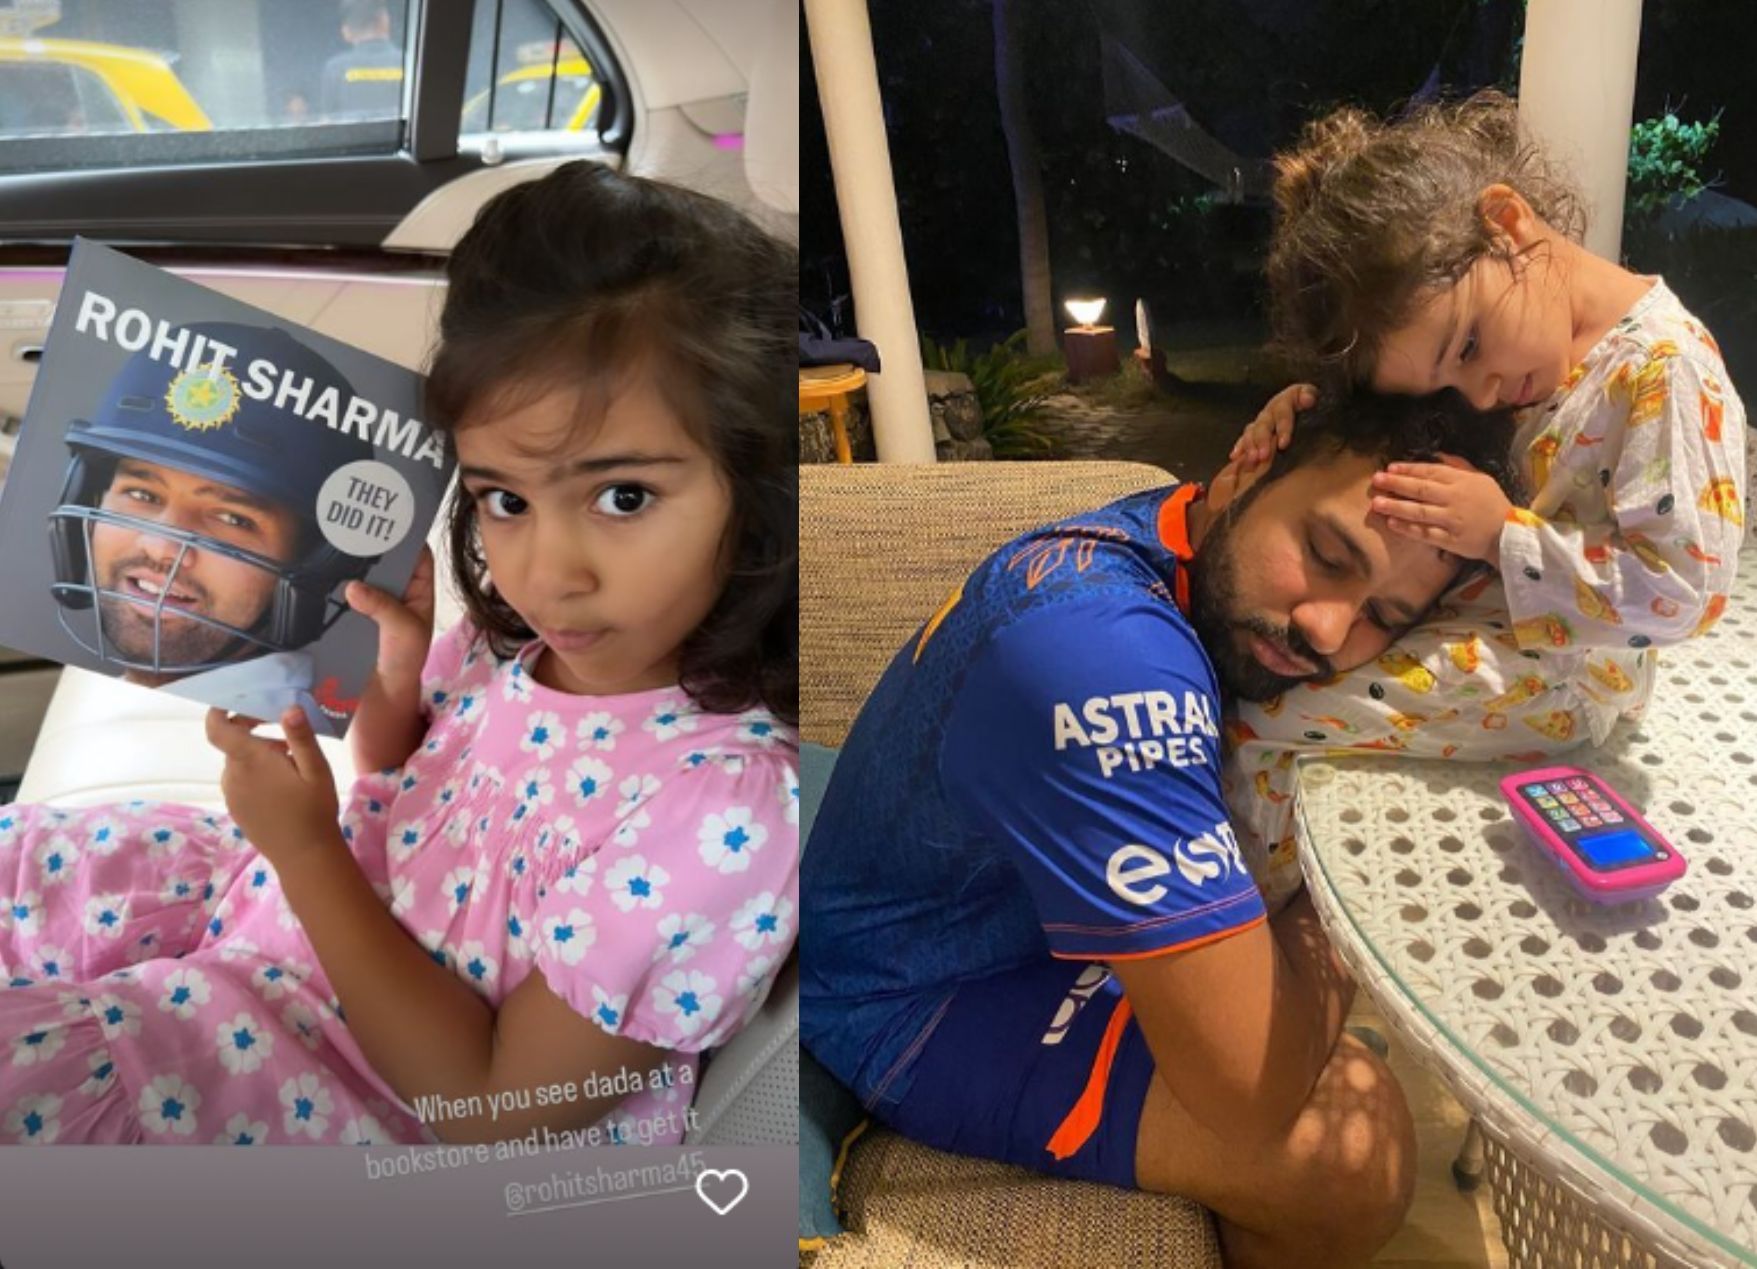 (Left) Samaira poses with a book written about her father; (Right) the father-daughter duo share an endearing moment.